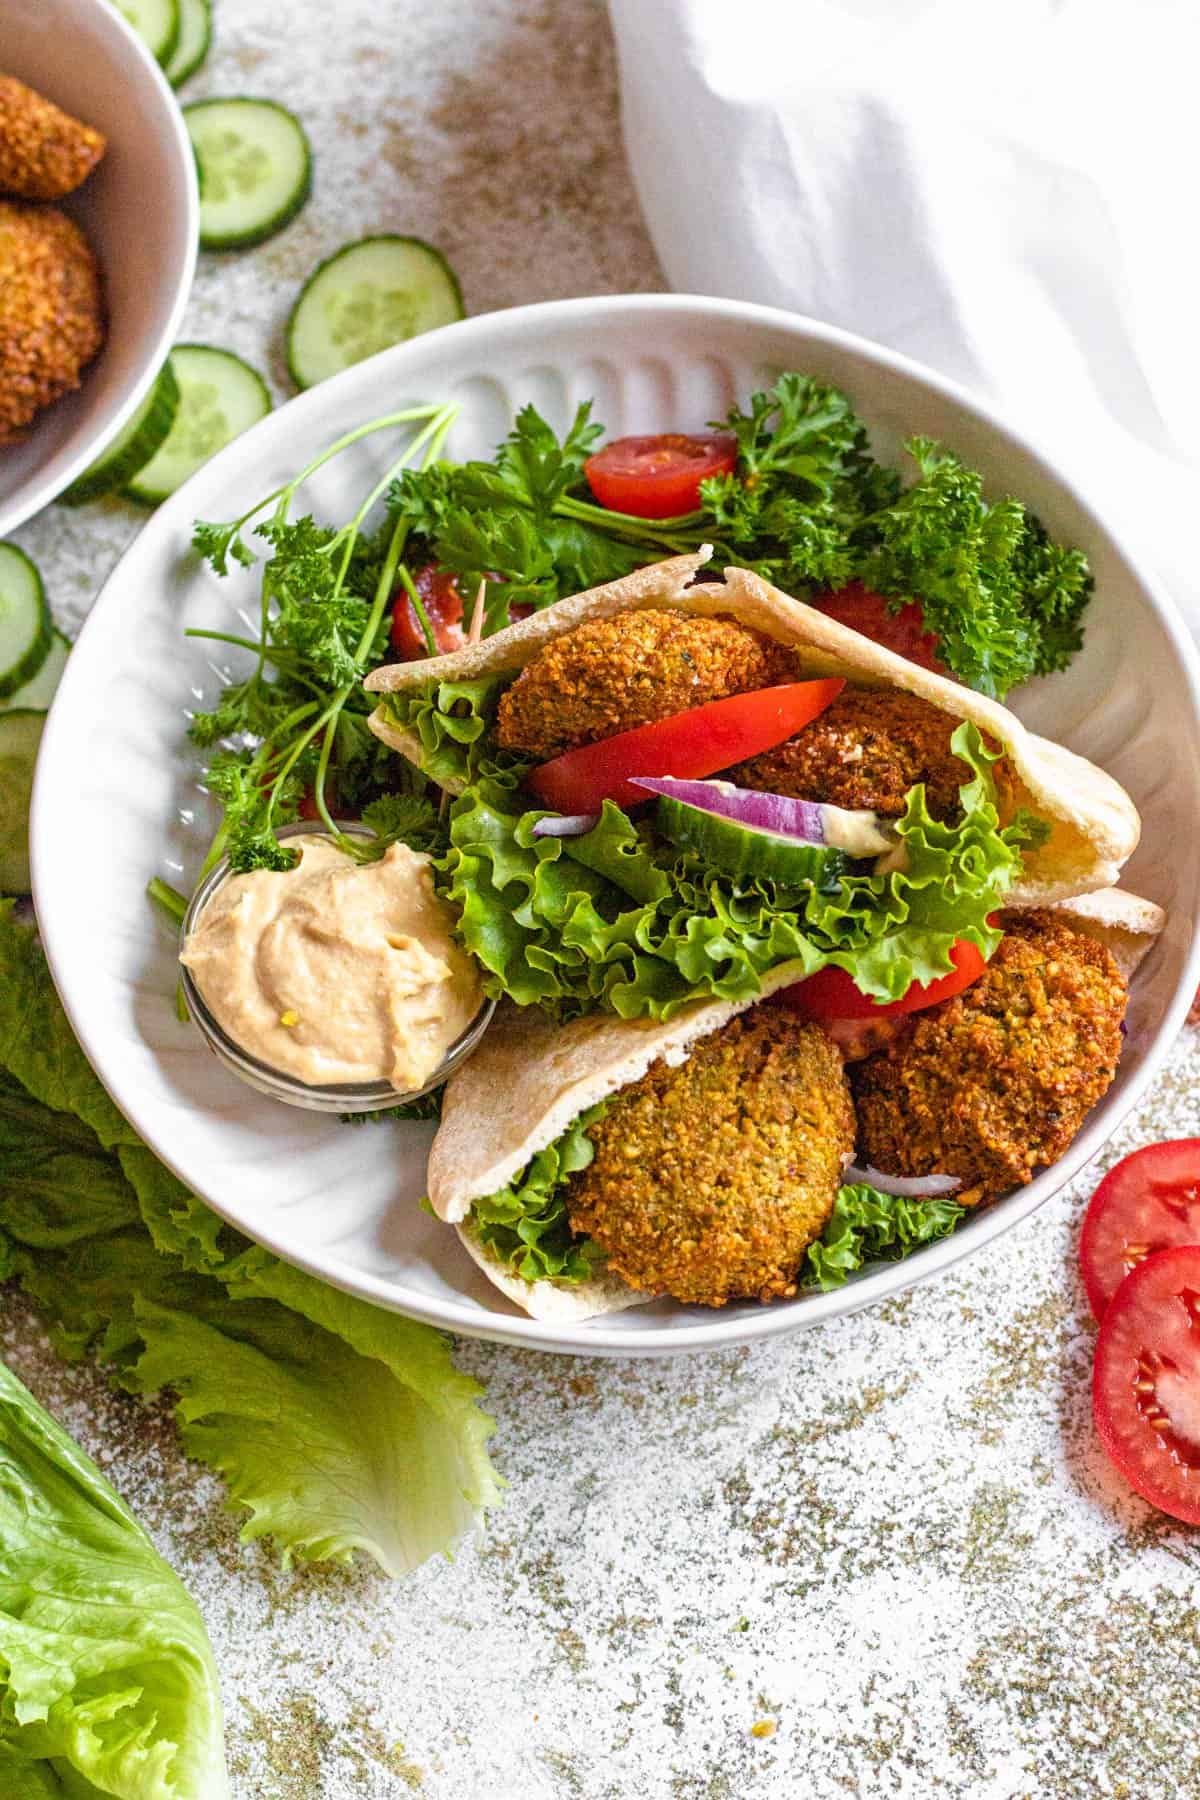 Bowl of falafel pitas with chopped cherry tomatoes and parsley garnishes. 